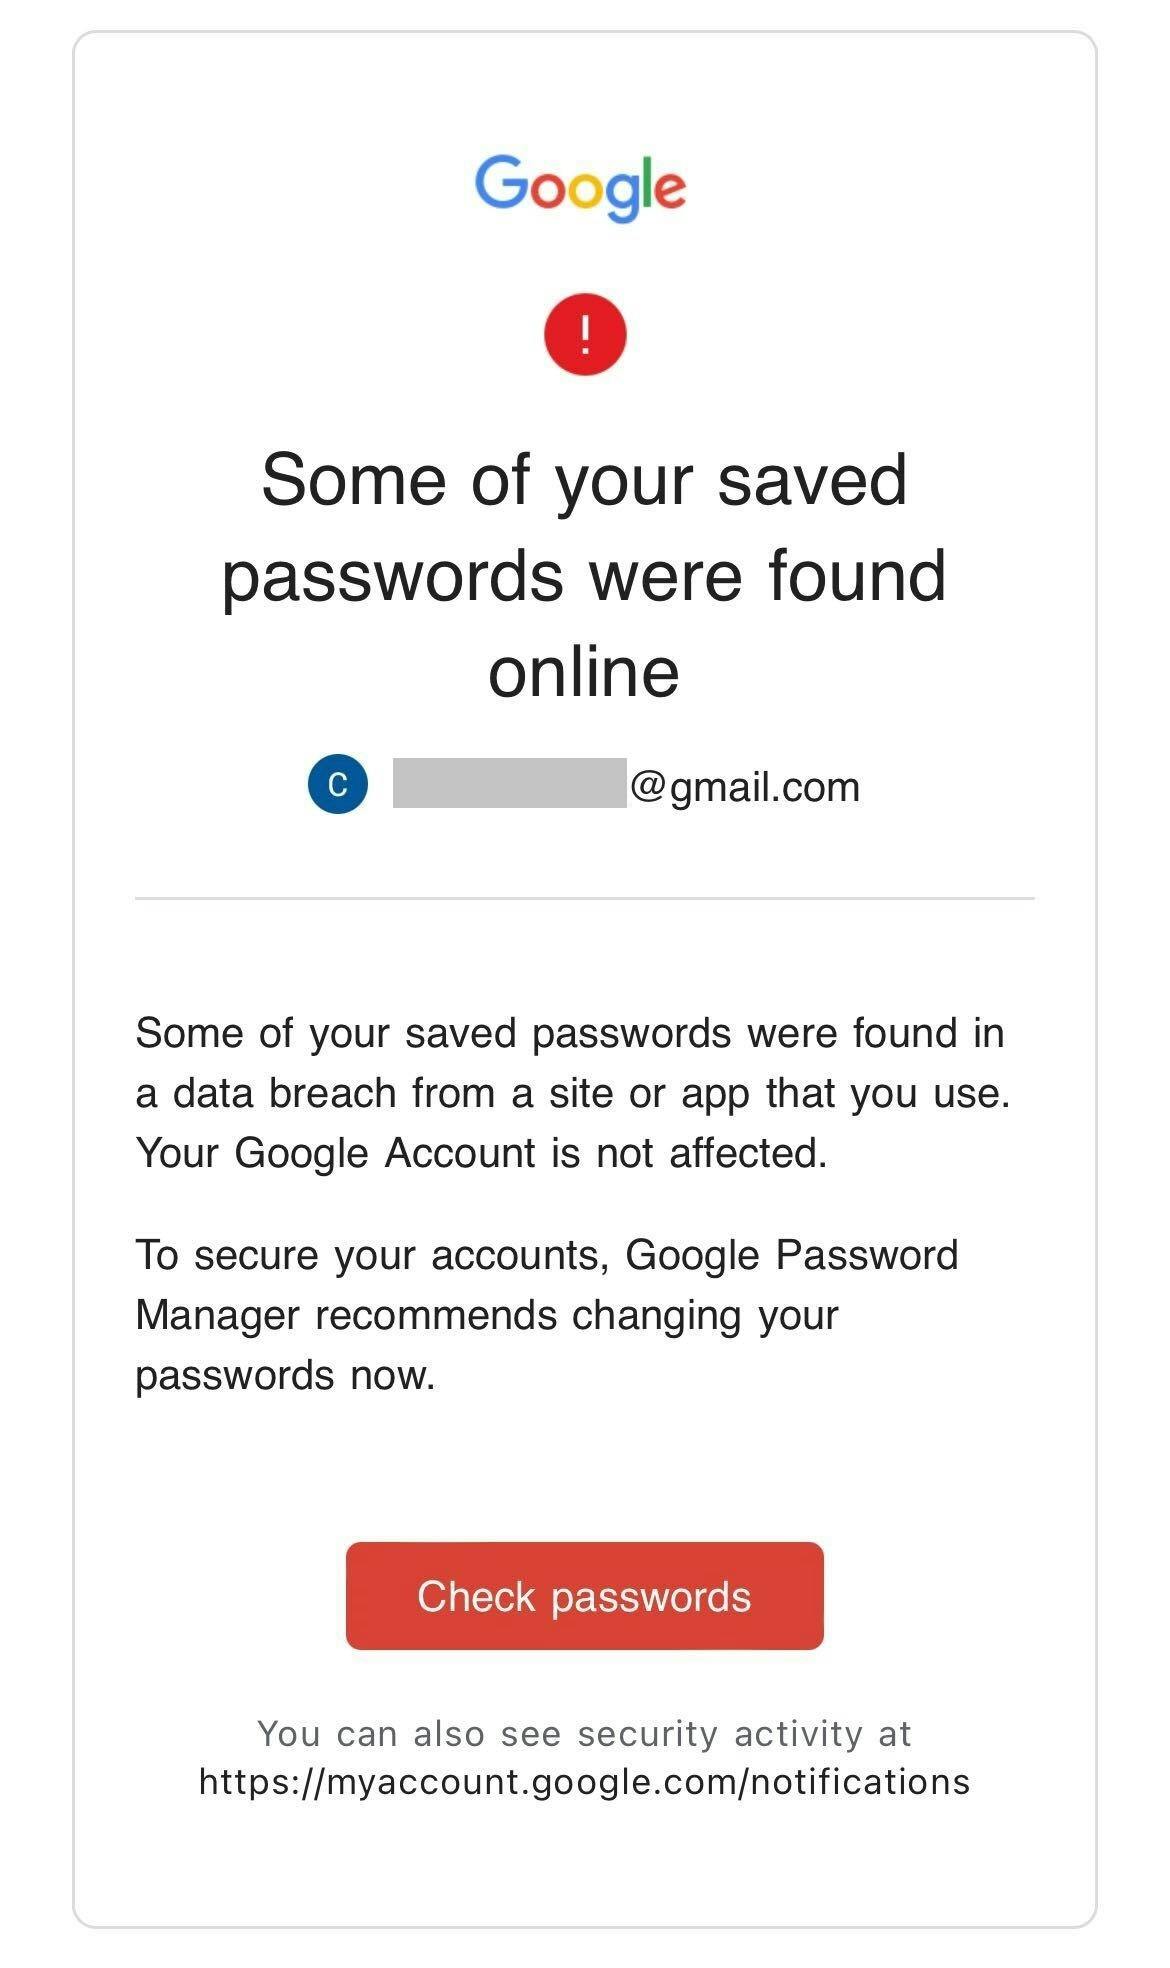 Example of an organization informing users about breached passwords